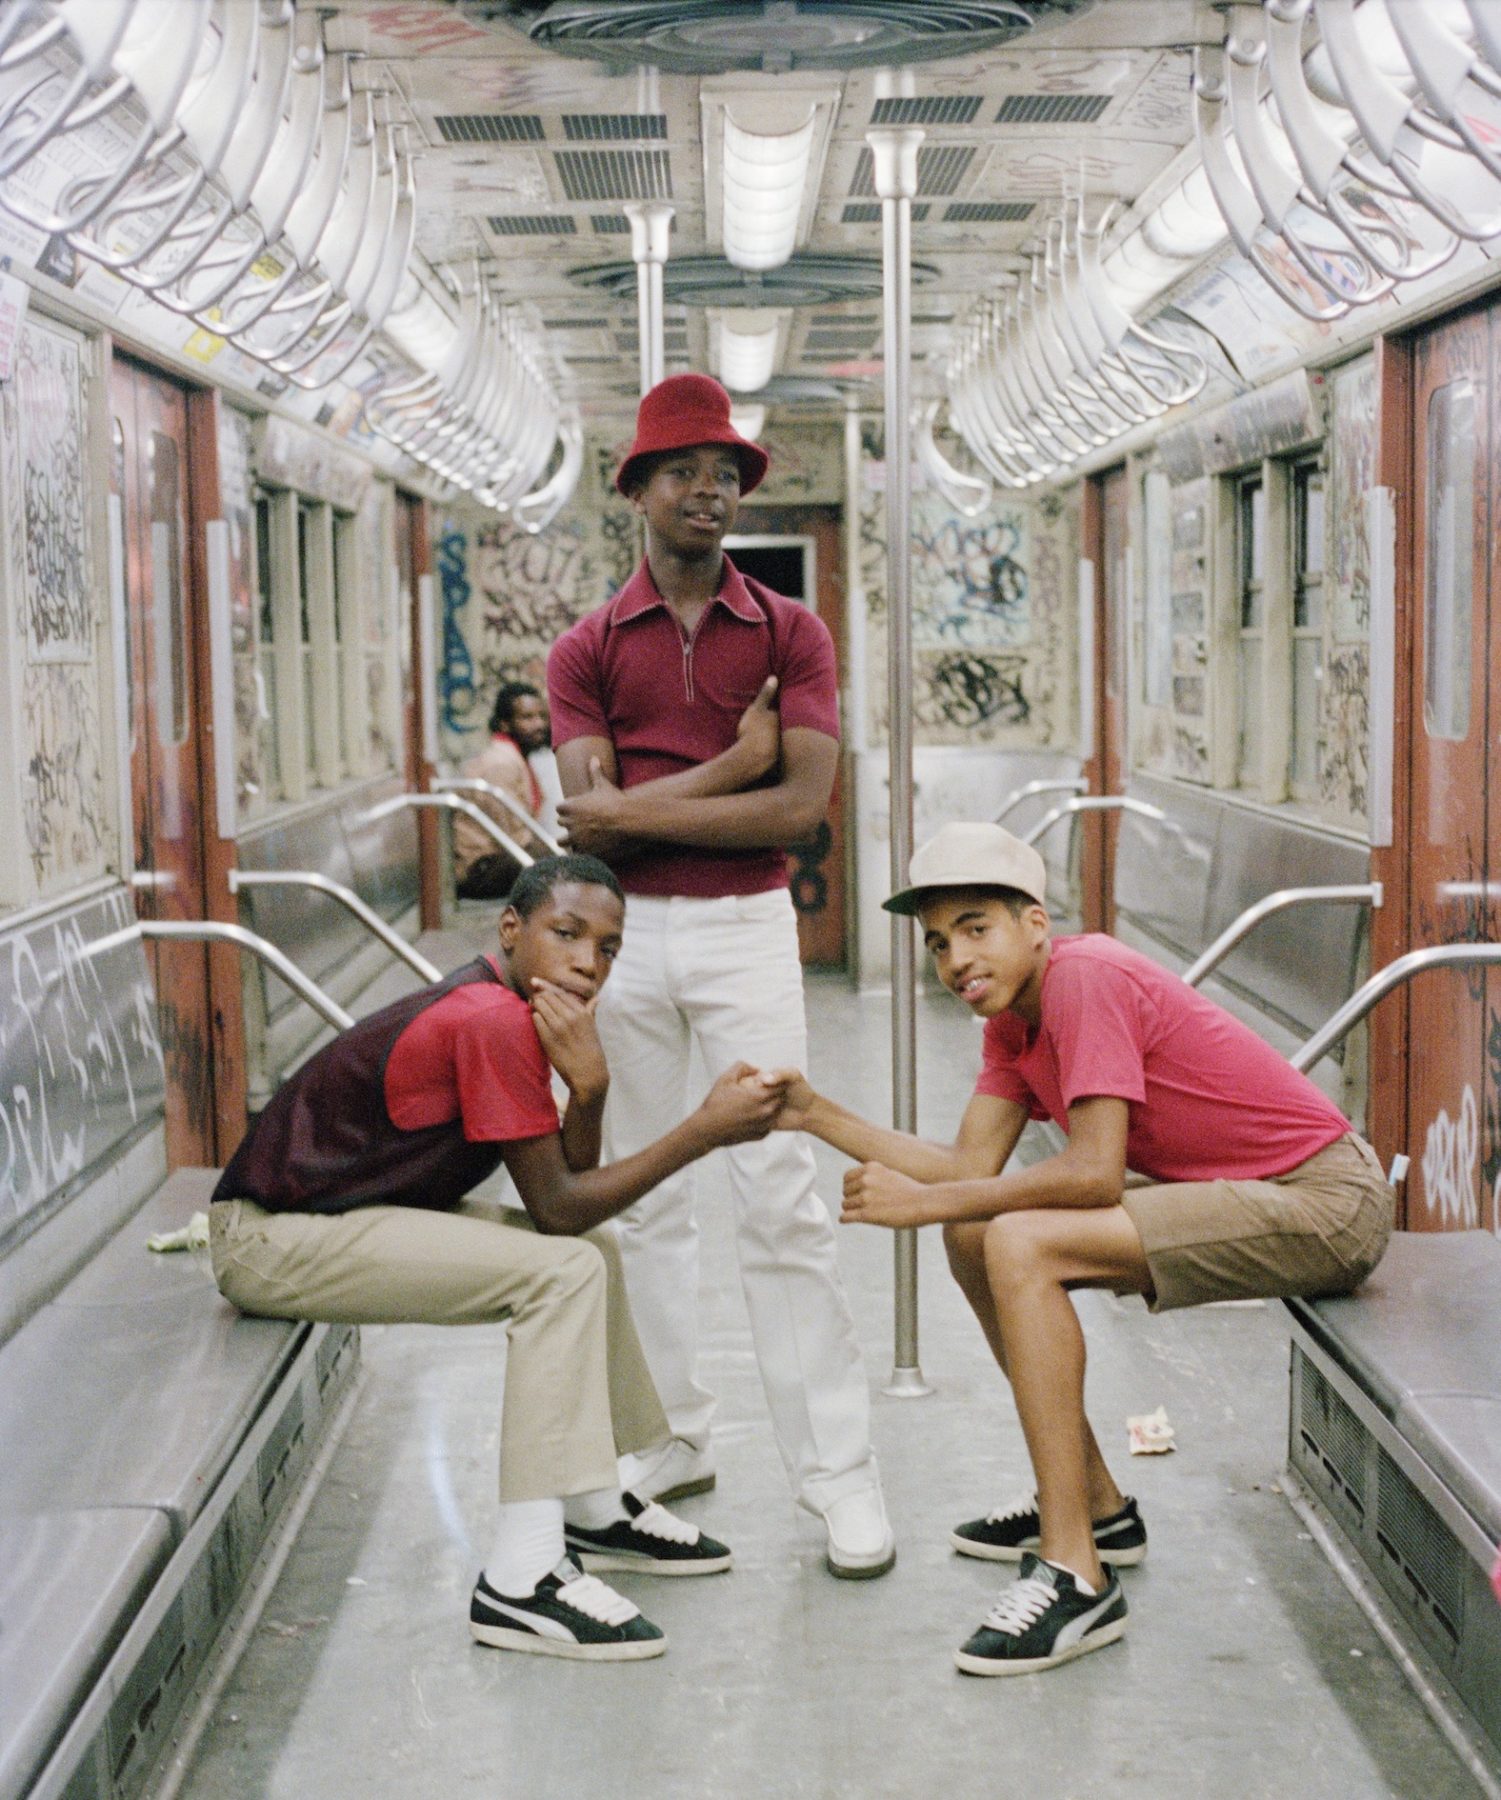 Street Photography Exhibition Qatar Brooklyn Jamel Shabazz Metro 1980 Vintage, Exhibition at The Gallery at VCUarts Qatar